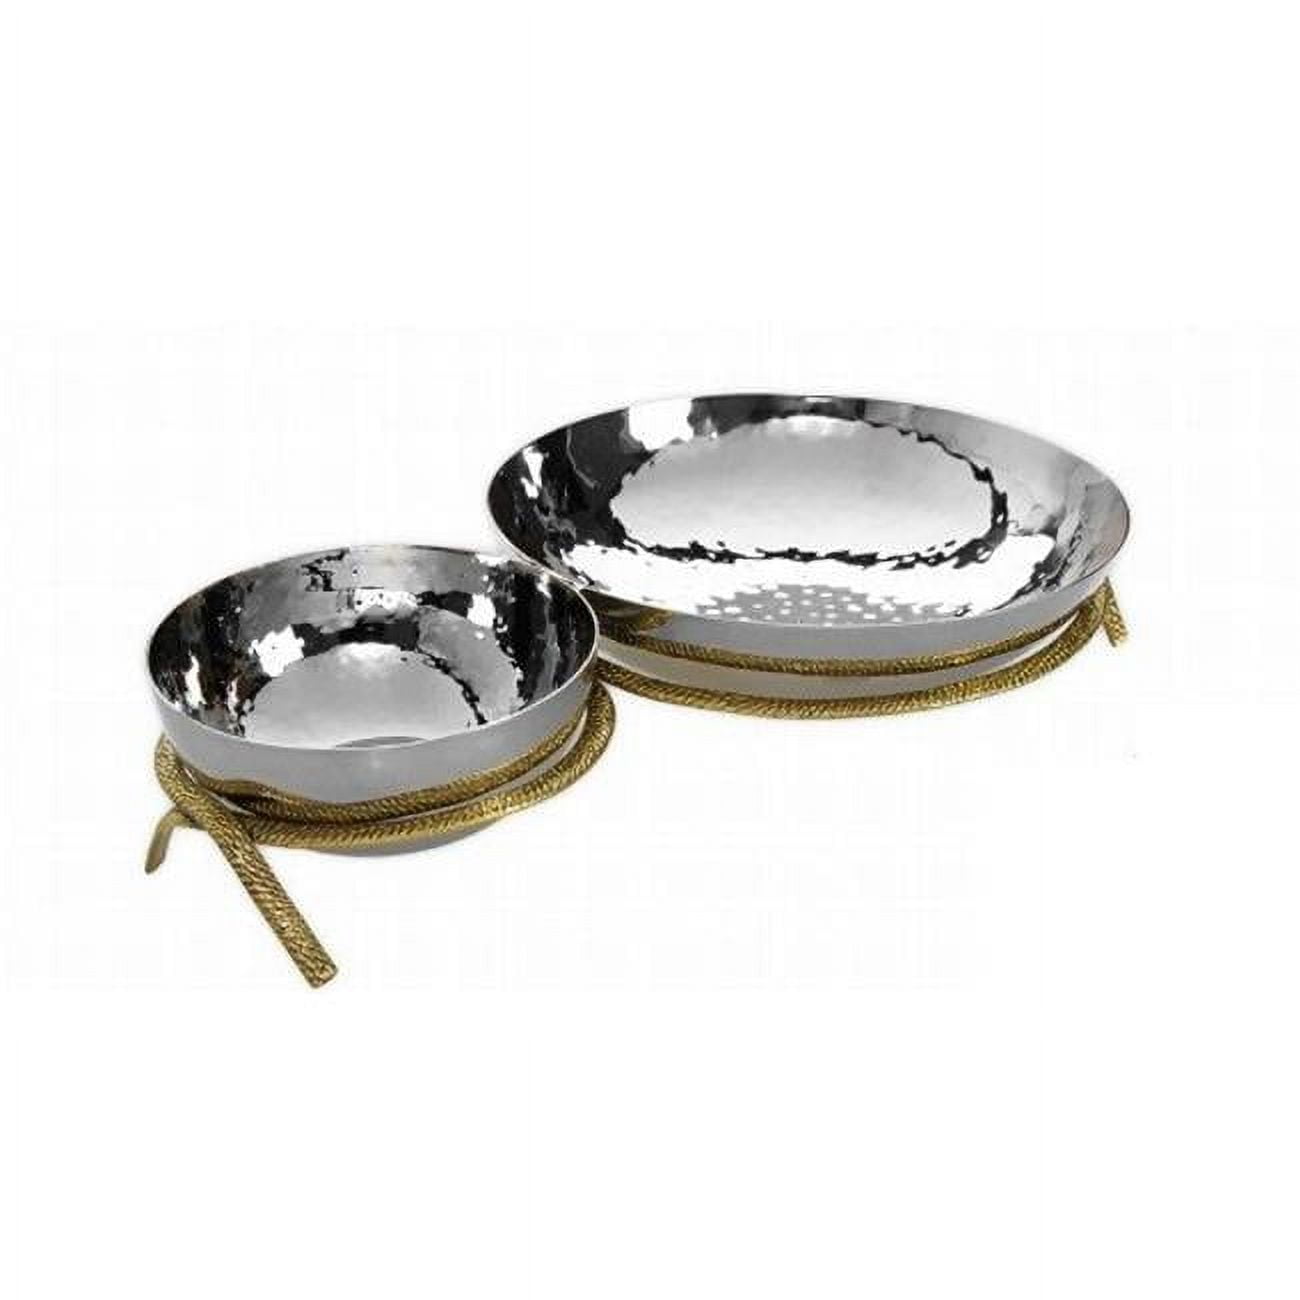 Classic Touch Spb26 6.5 X 10.5 In. Double Bowl With Gold Spaghetti Look Base